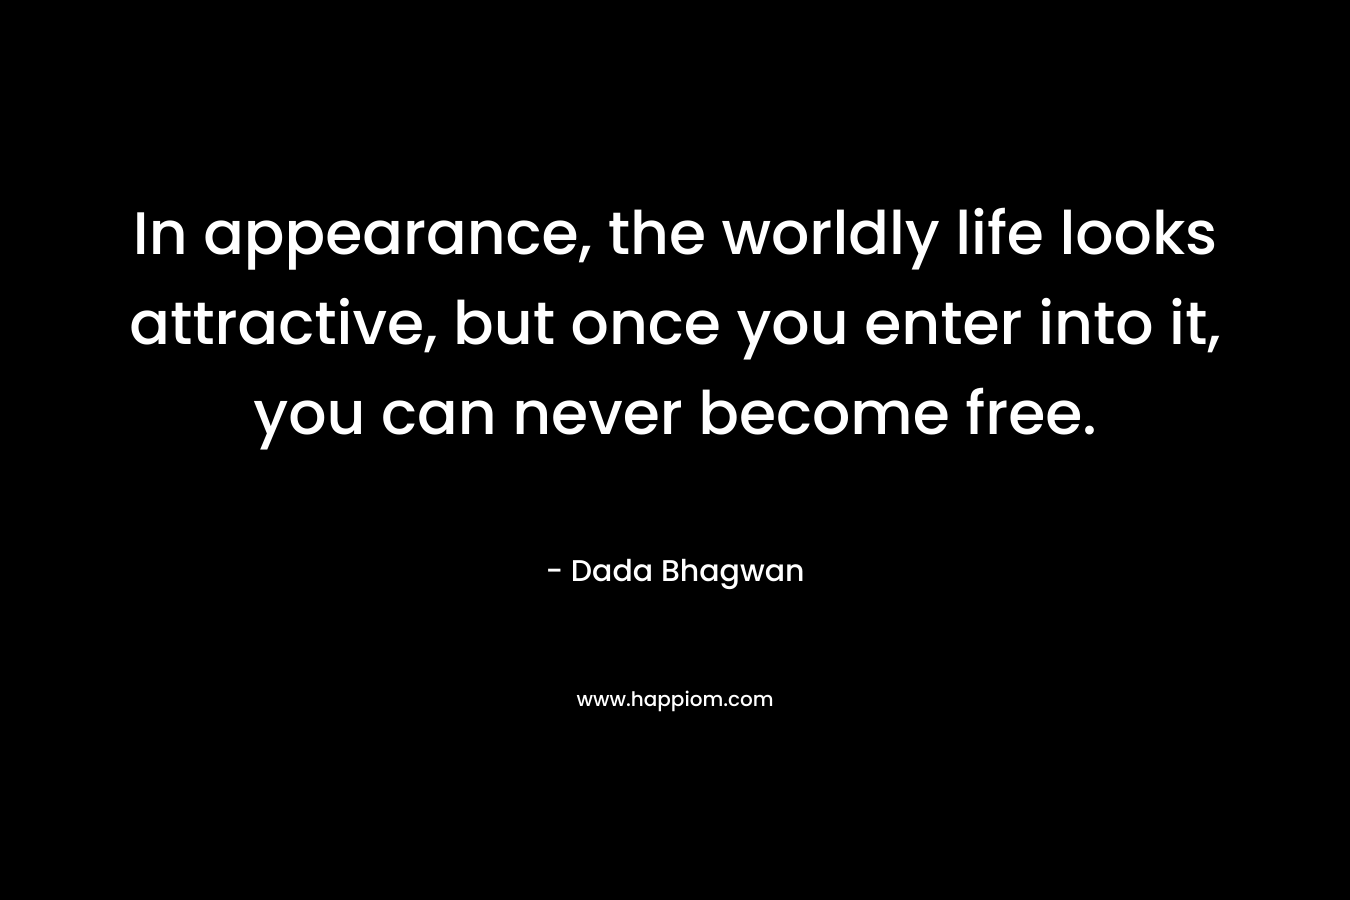 In appearance, the worldly life looks attractive, but once you enter into it, you can never become free.